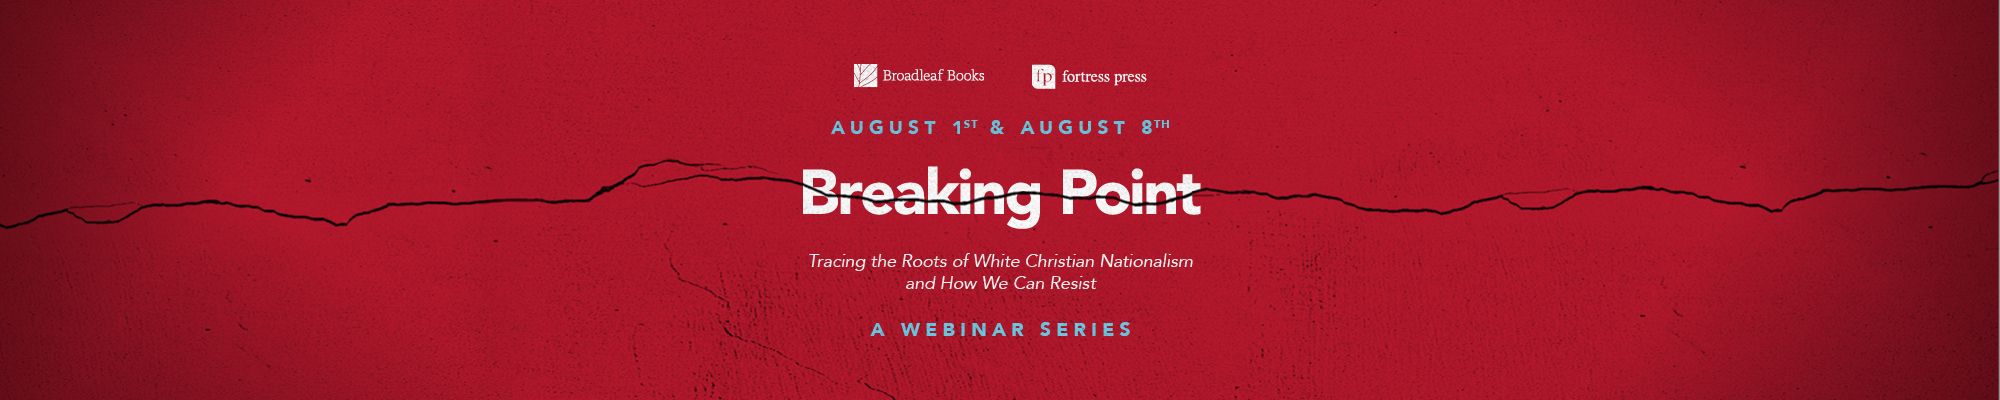 Broadleaf Books. Fortress Press. August 1st and August 8th. Breaking Point: Tracing the Roots of White Christian Nationalism and How We Can Resist. A Webinar Series.